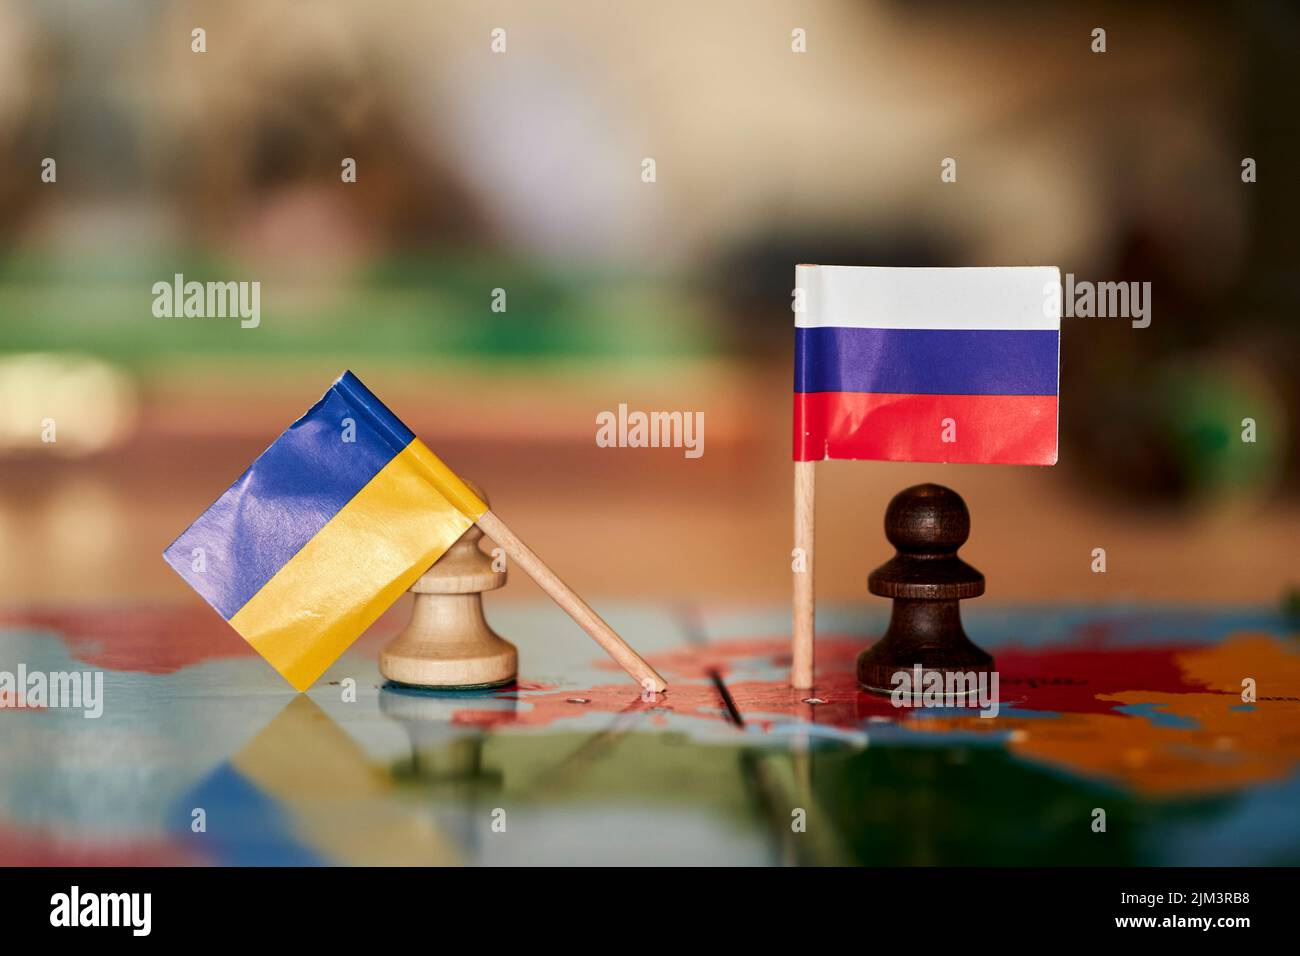 The Chess pieces as a symbol of the conflict between Russia and Ukraine Stock Photo